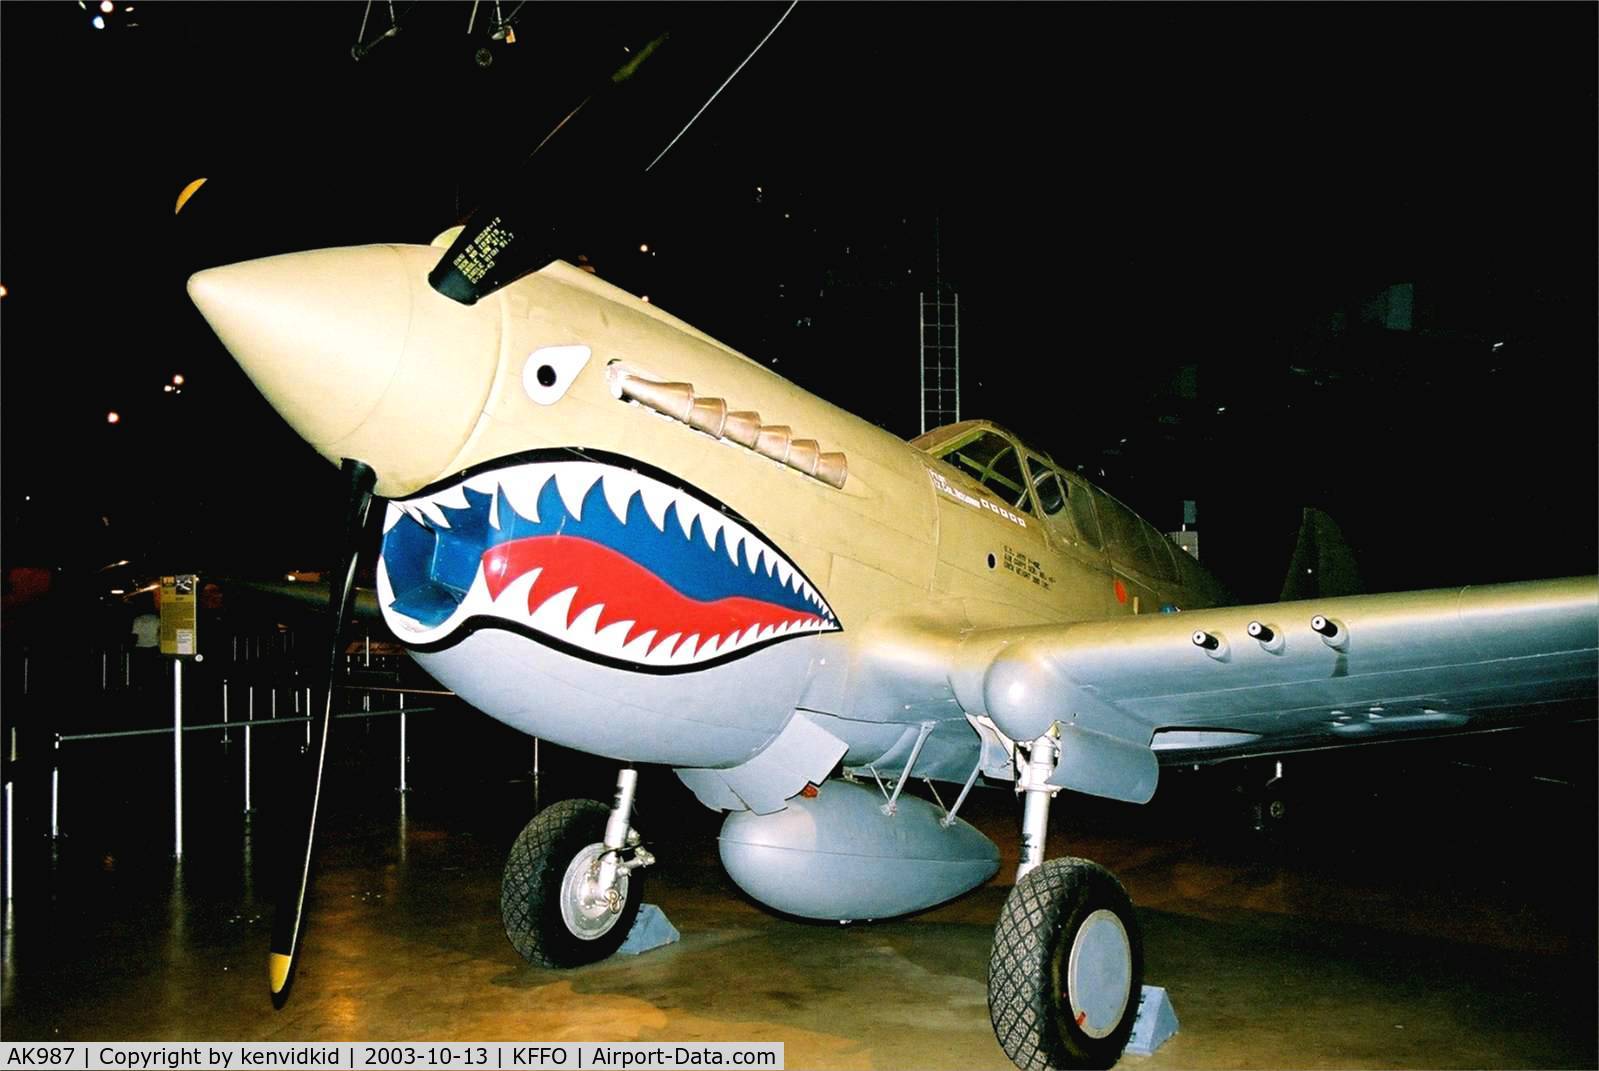 AK987, 1942 Curtiss P-40E Kittyhawk 1A C/N 18731, At The Museum of the United States Air Force Dayton Ohio.